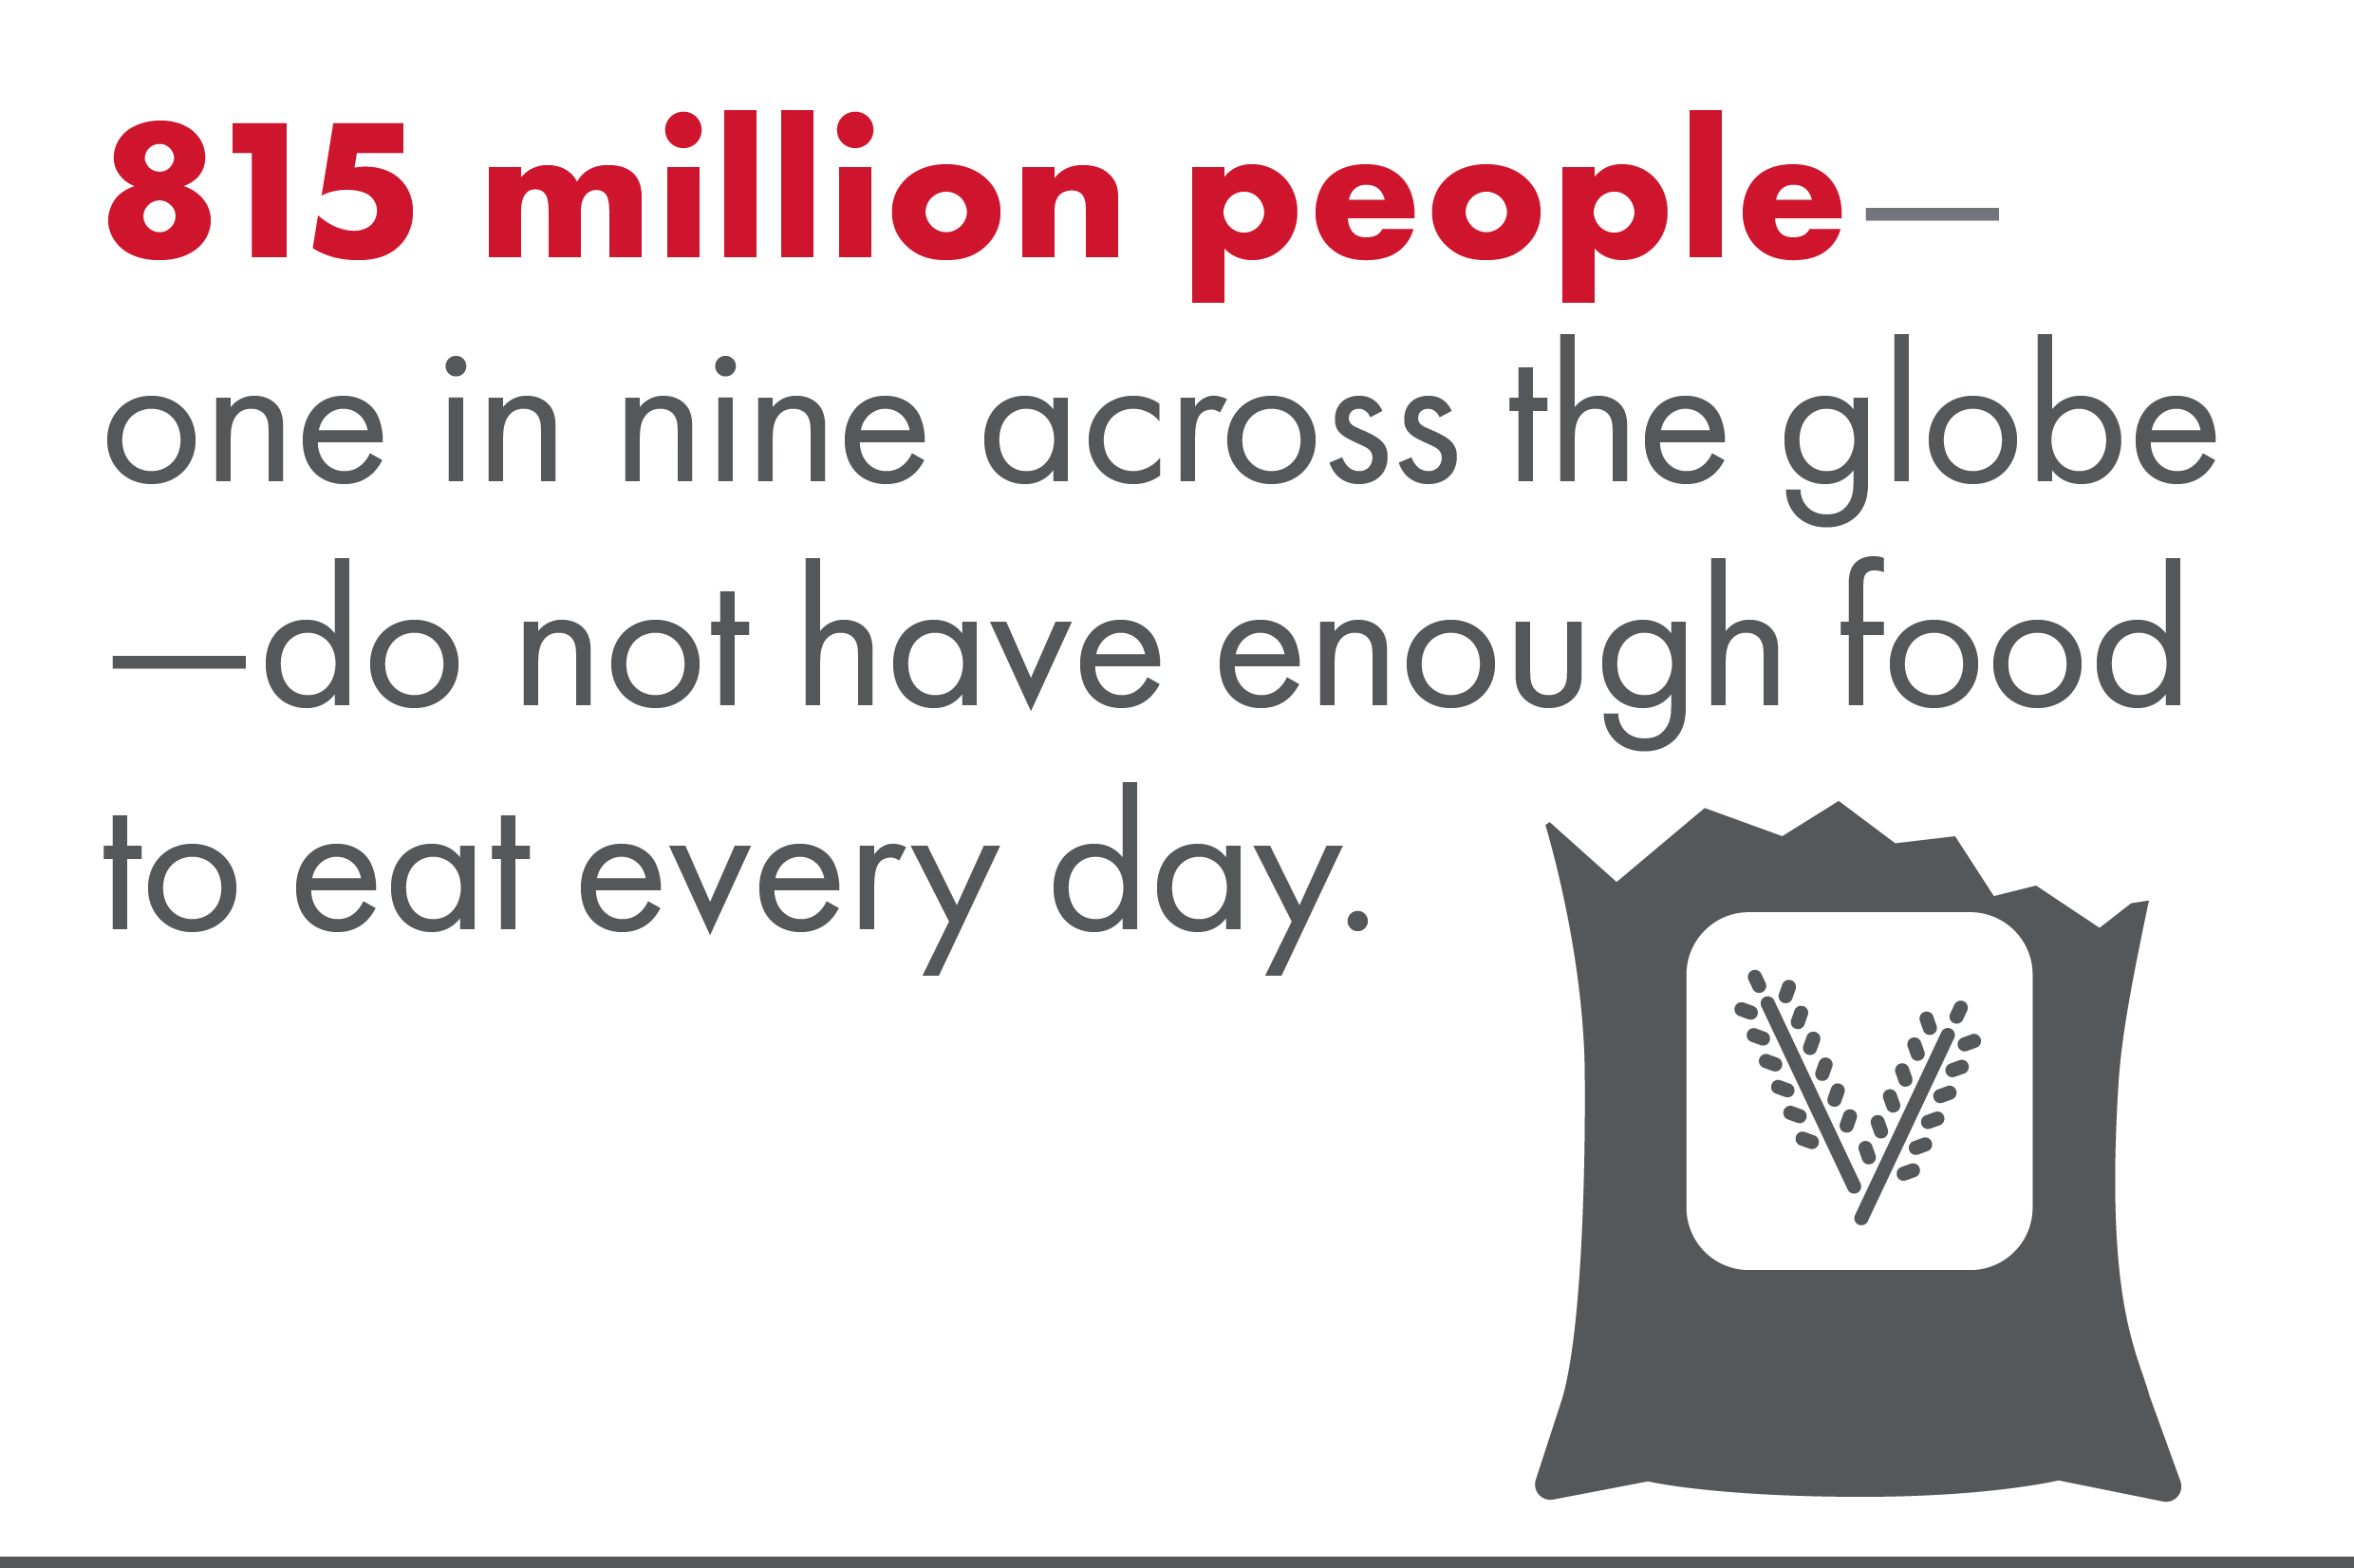 815 million people - one in nine across the globe - do not have enough food to eat every day.